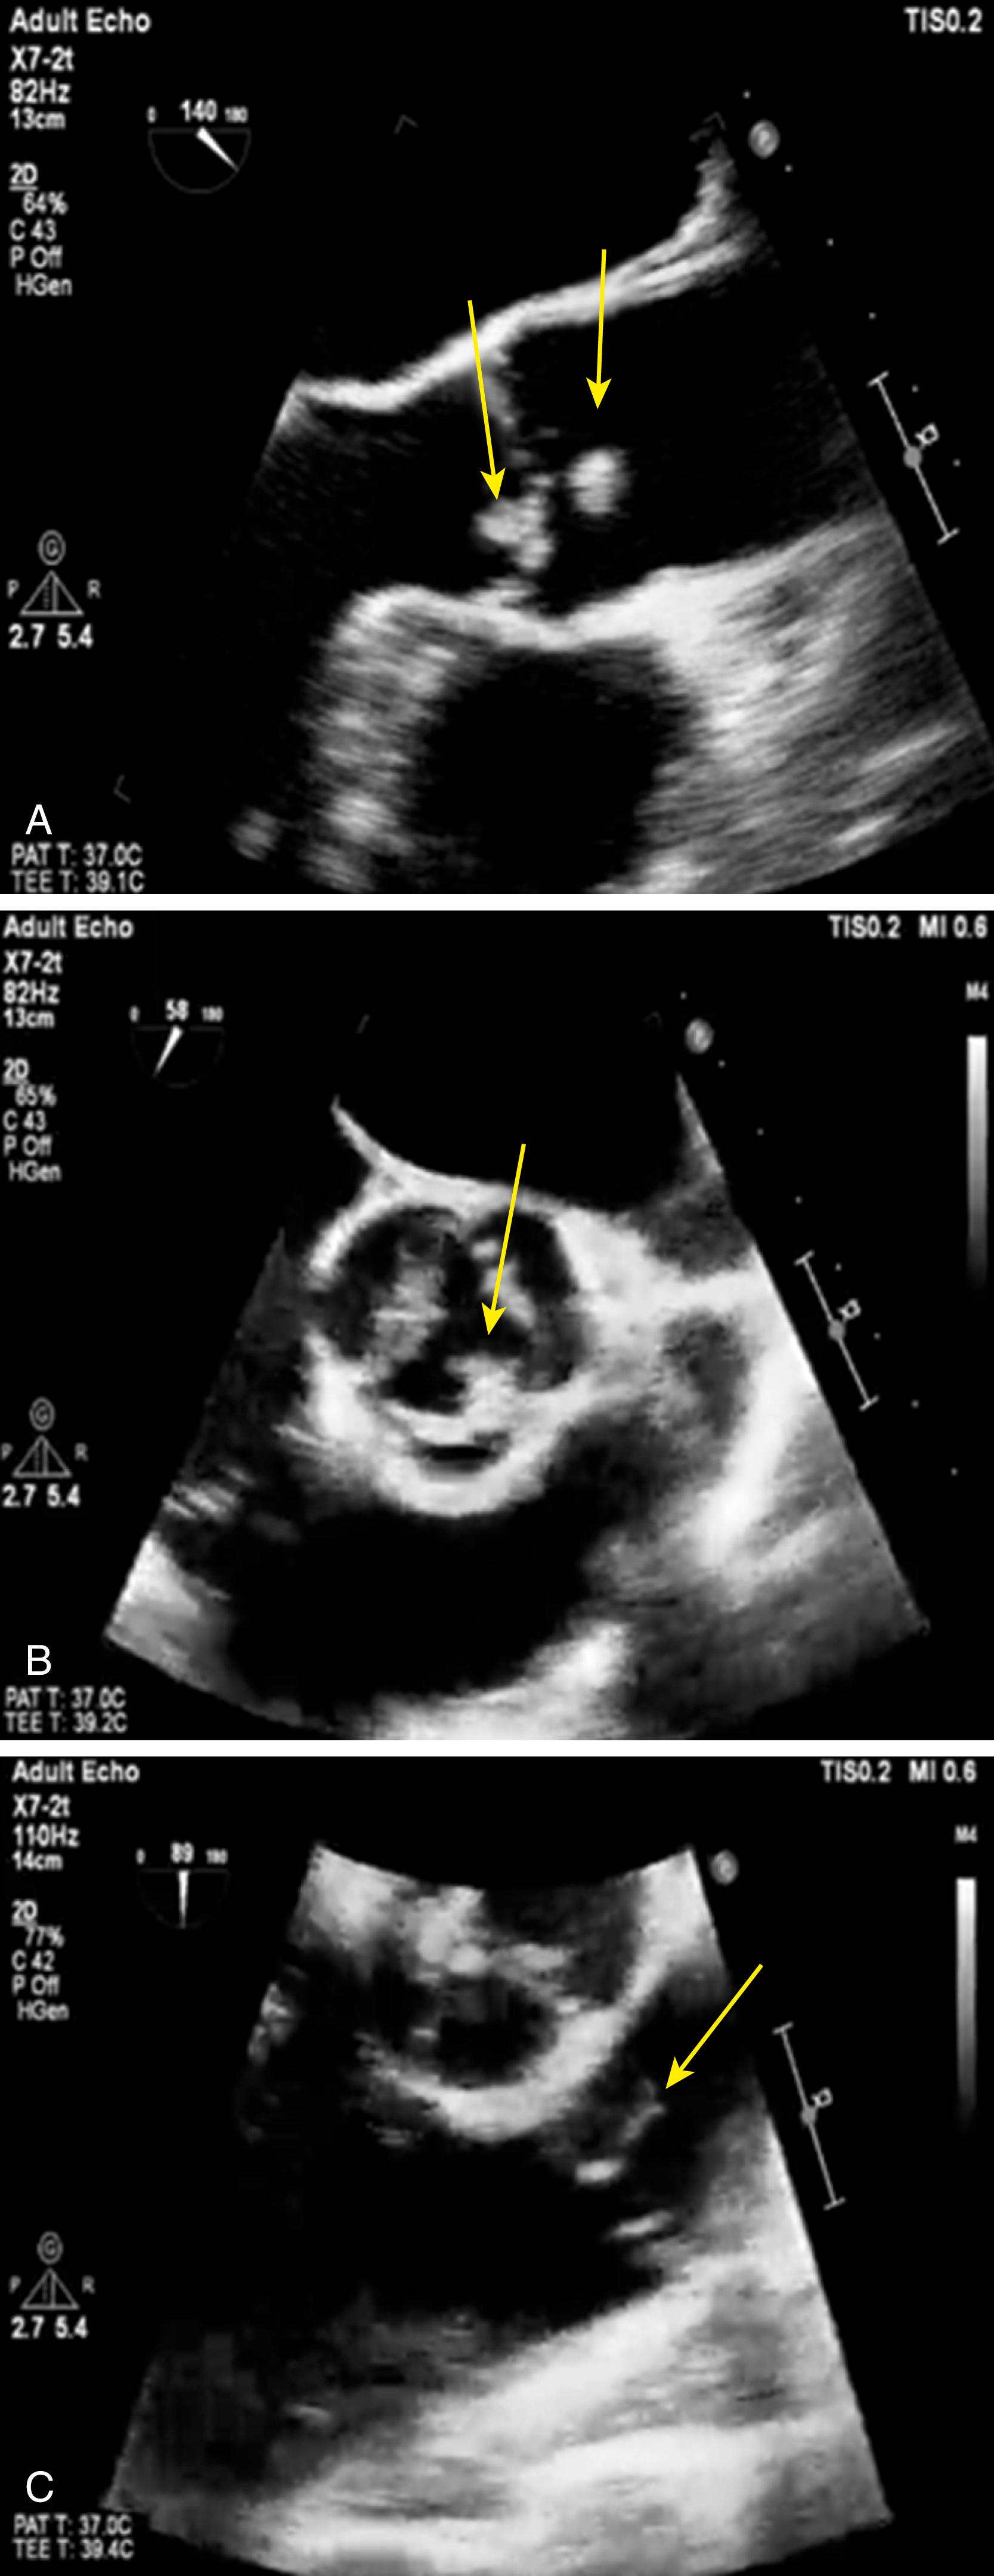 Figure 116.3, Marantic (noninfective) endocarditis involving both the aortic valve and pulmonic valve with multiple small vegetations seen without associated valvular destruction or perivalvular abscess. A, Transesophageal echocardiography (TEE) 120-degree (long-axis) view of the aortic valve with several small vegetations seen (arrows) . B, TEE 60-degree (short-axis) view of the aortic valve with the same vegetations seen. C, TEE 60-degree view of the pulmonic valve with linear echodensity seen in the same patient.